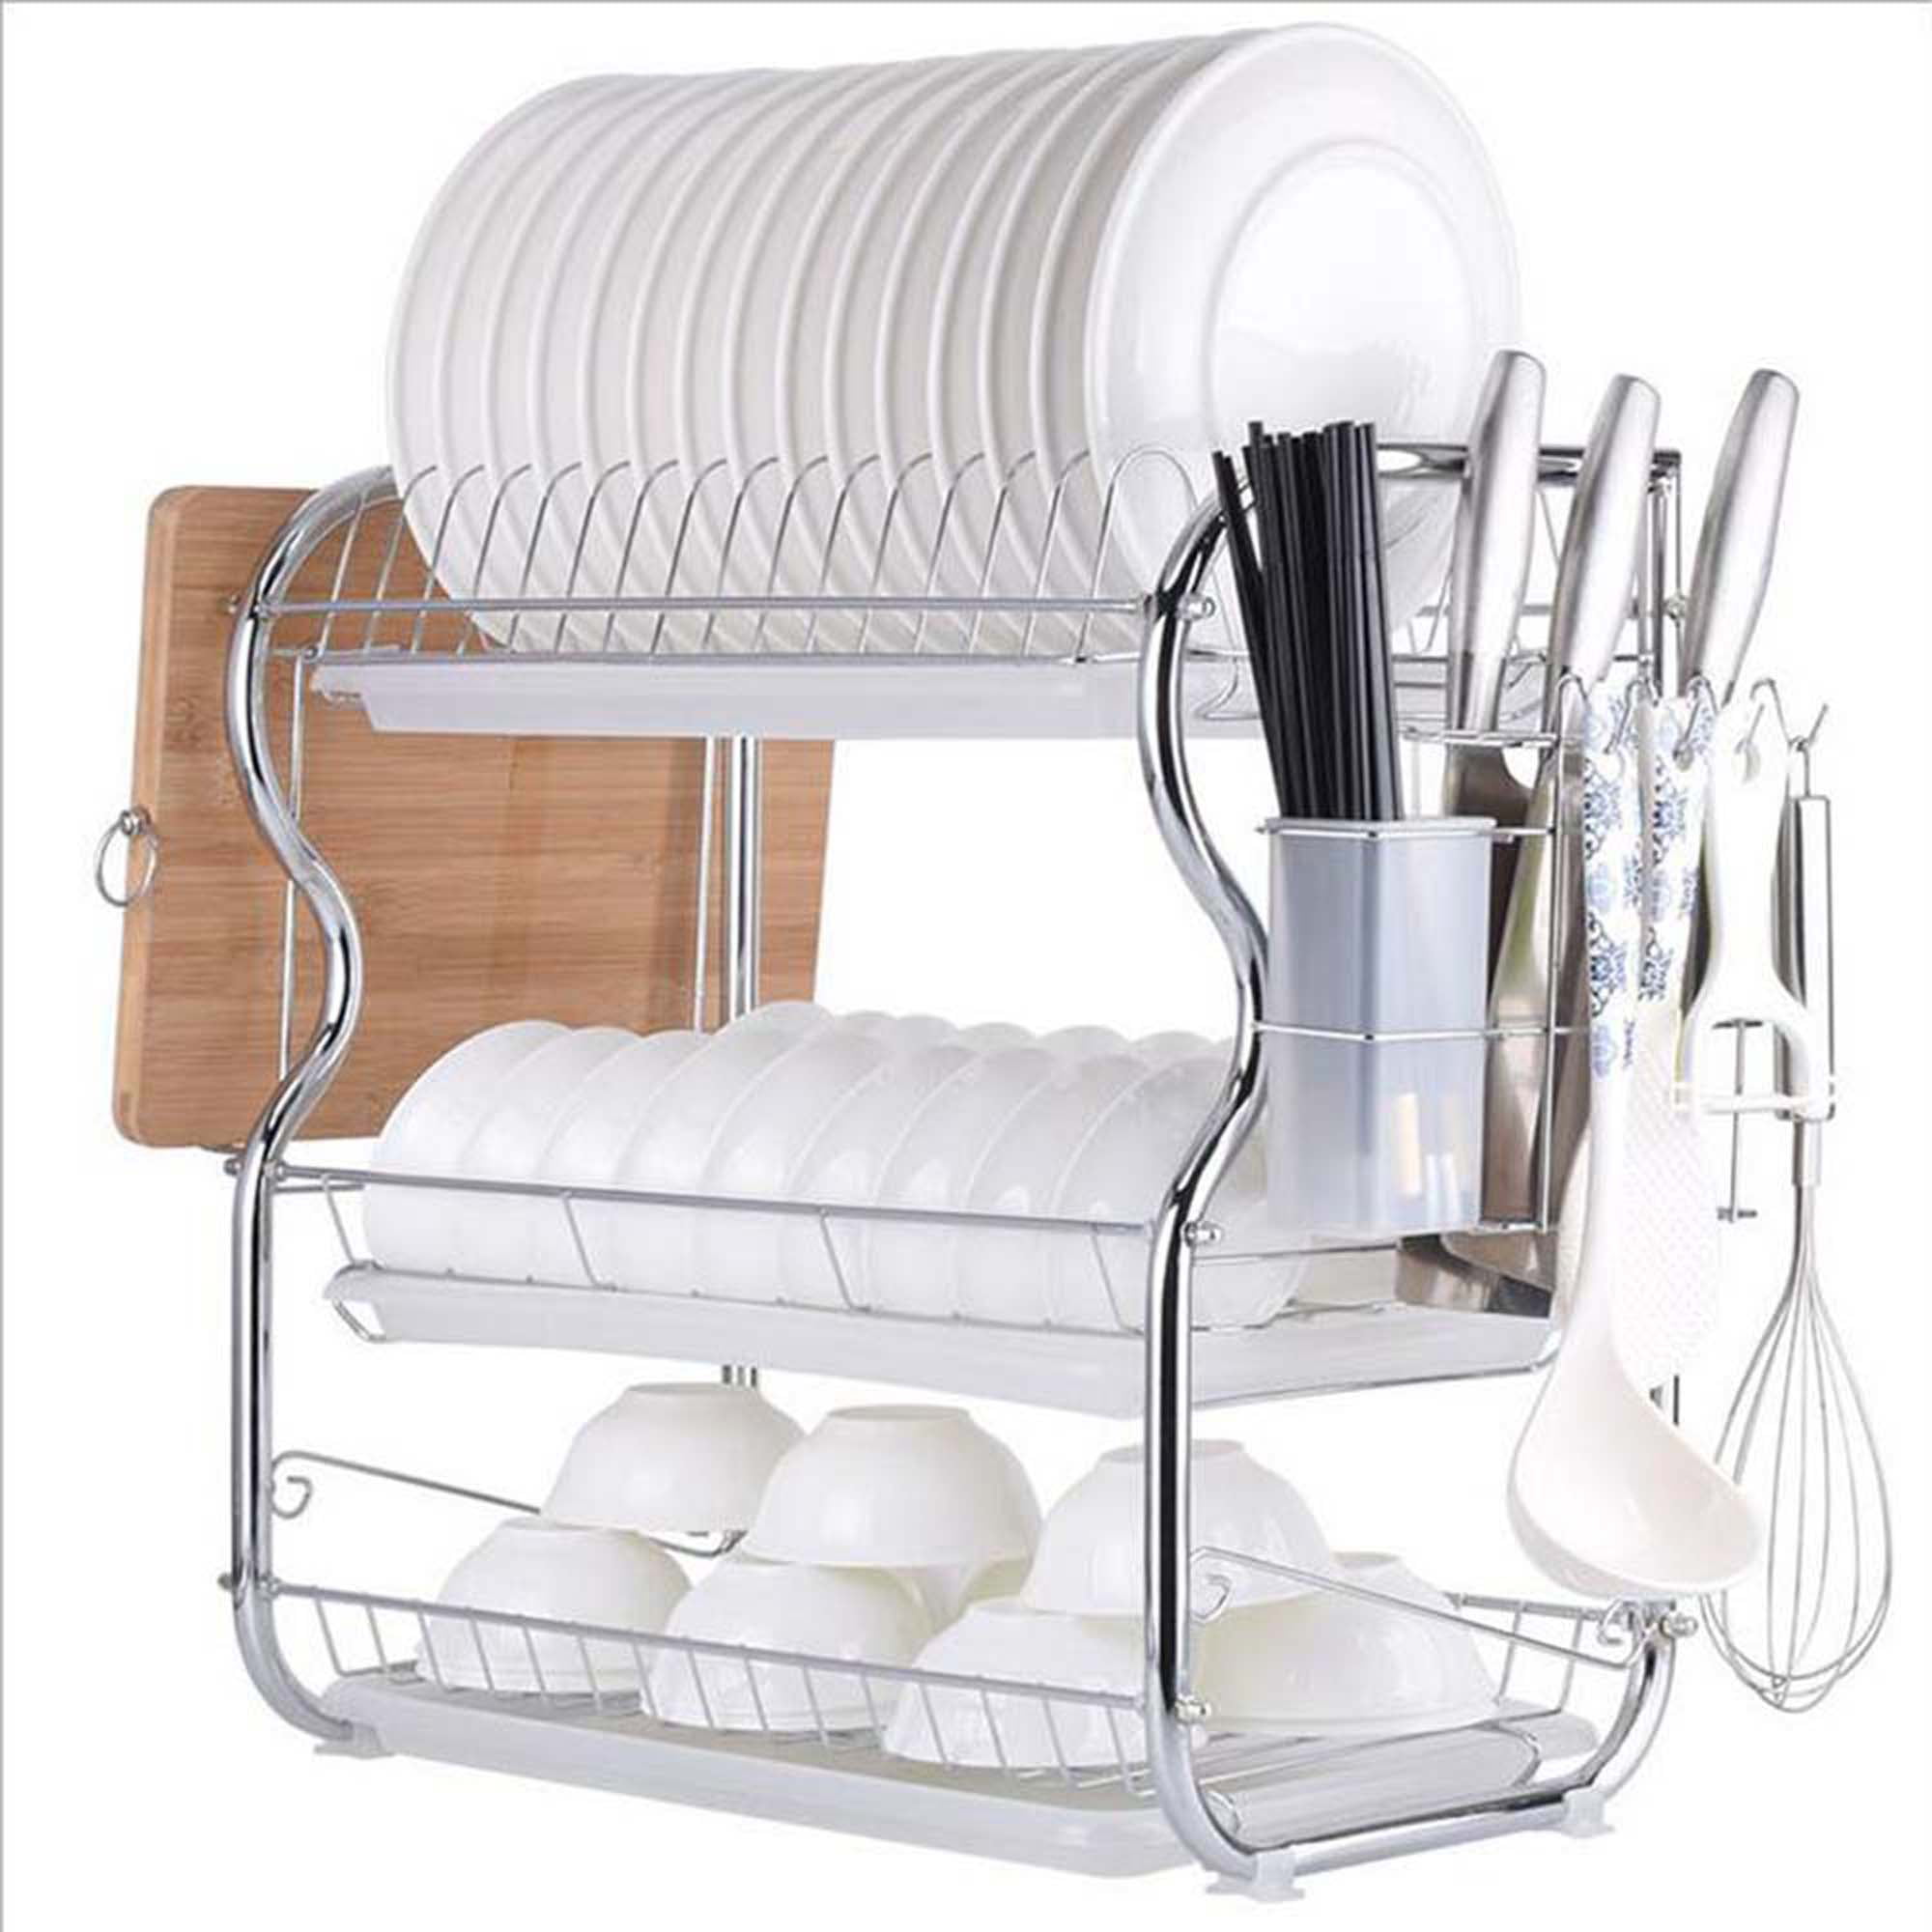 NK Stainless Steel 3 Tiers Dish Drying Rack Dish Drainer Drying Rack Stainless Steel Dish Dry Rack